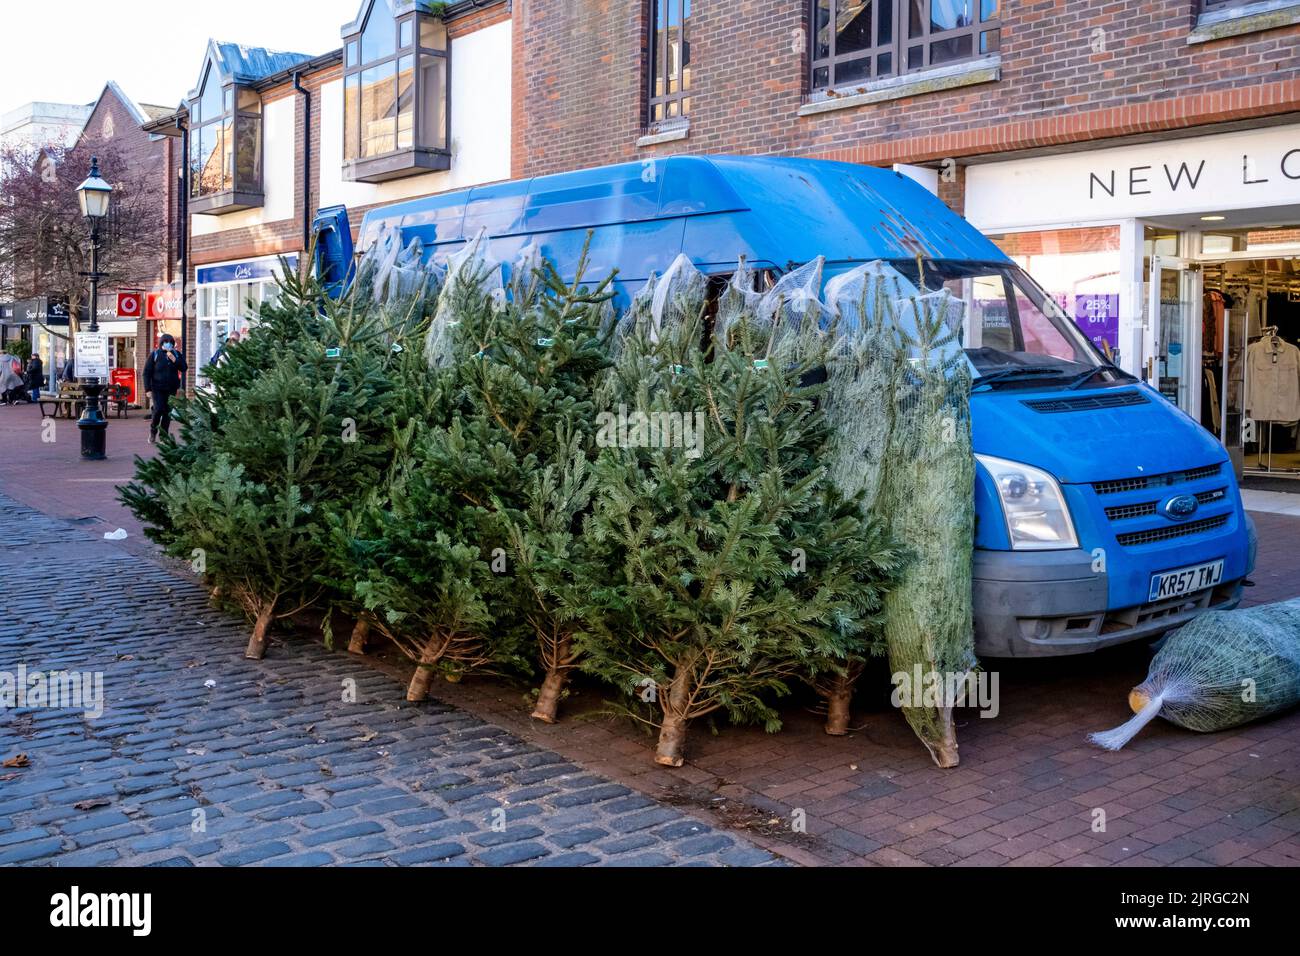 Christmas Trees For Sale, High Street, Lewes, East Sussex, UK. Stock Photo